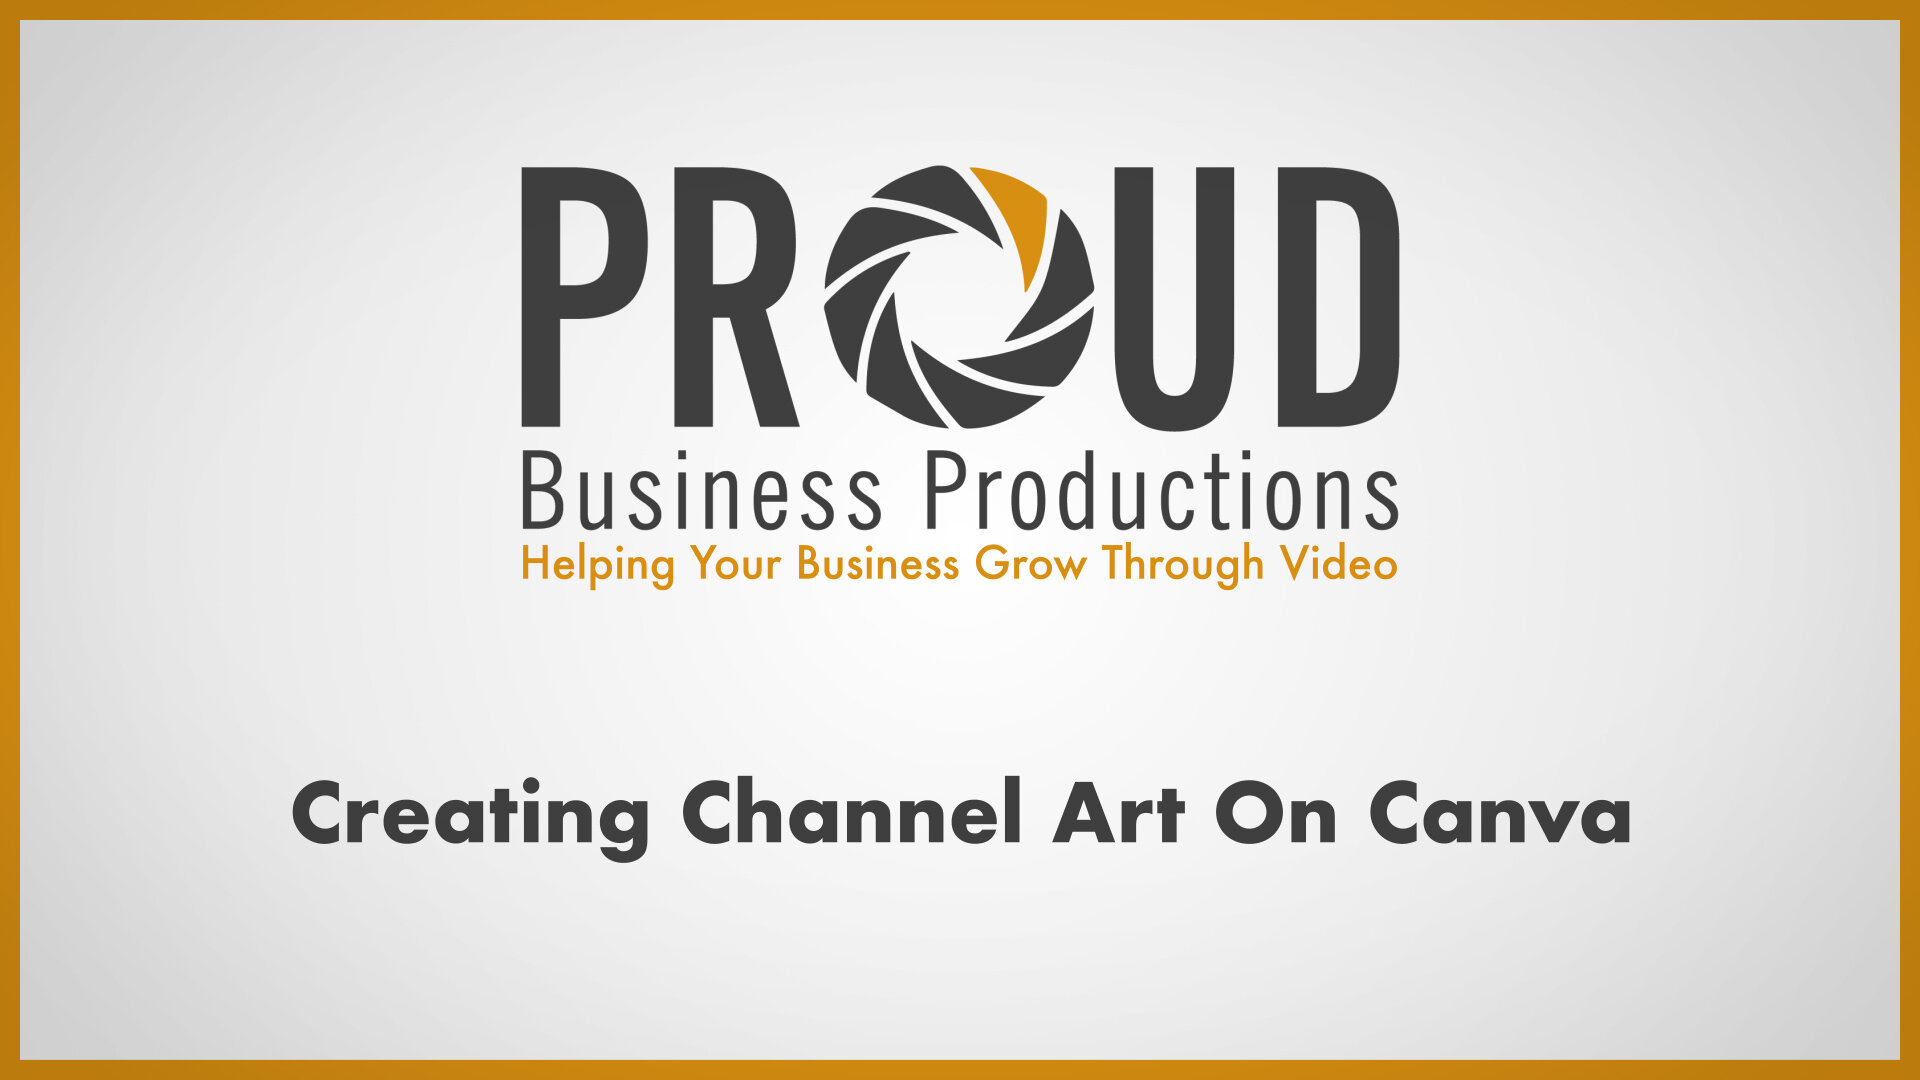 Proud Business Productions - How To Create YouTube Channel Art In Canva